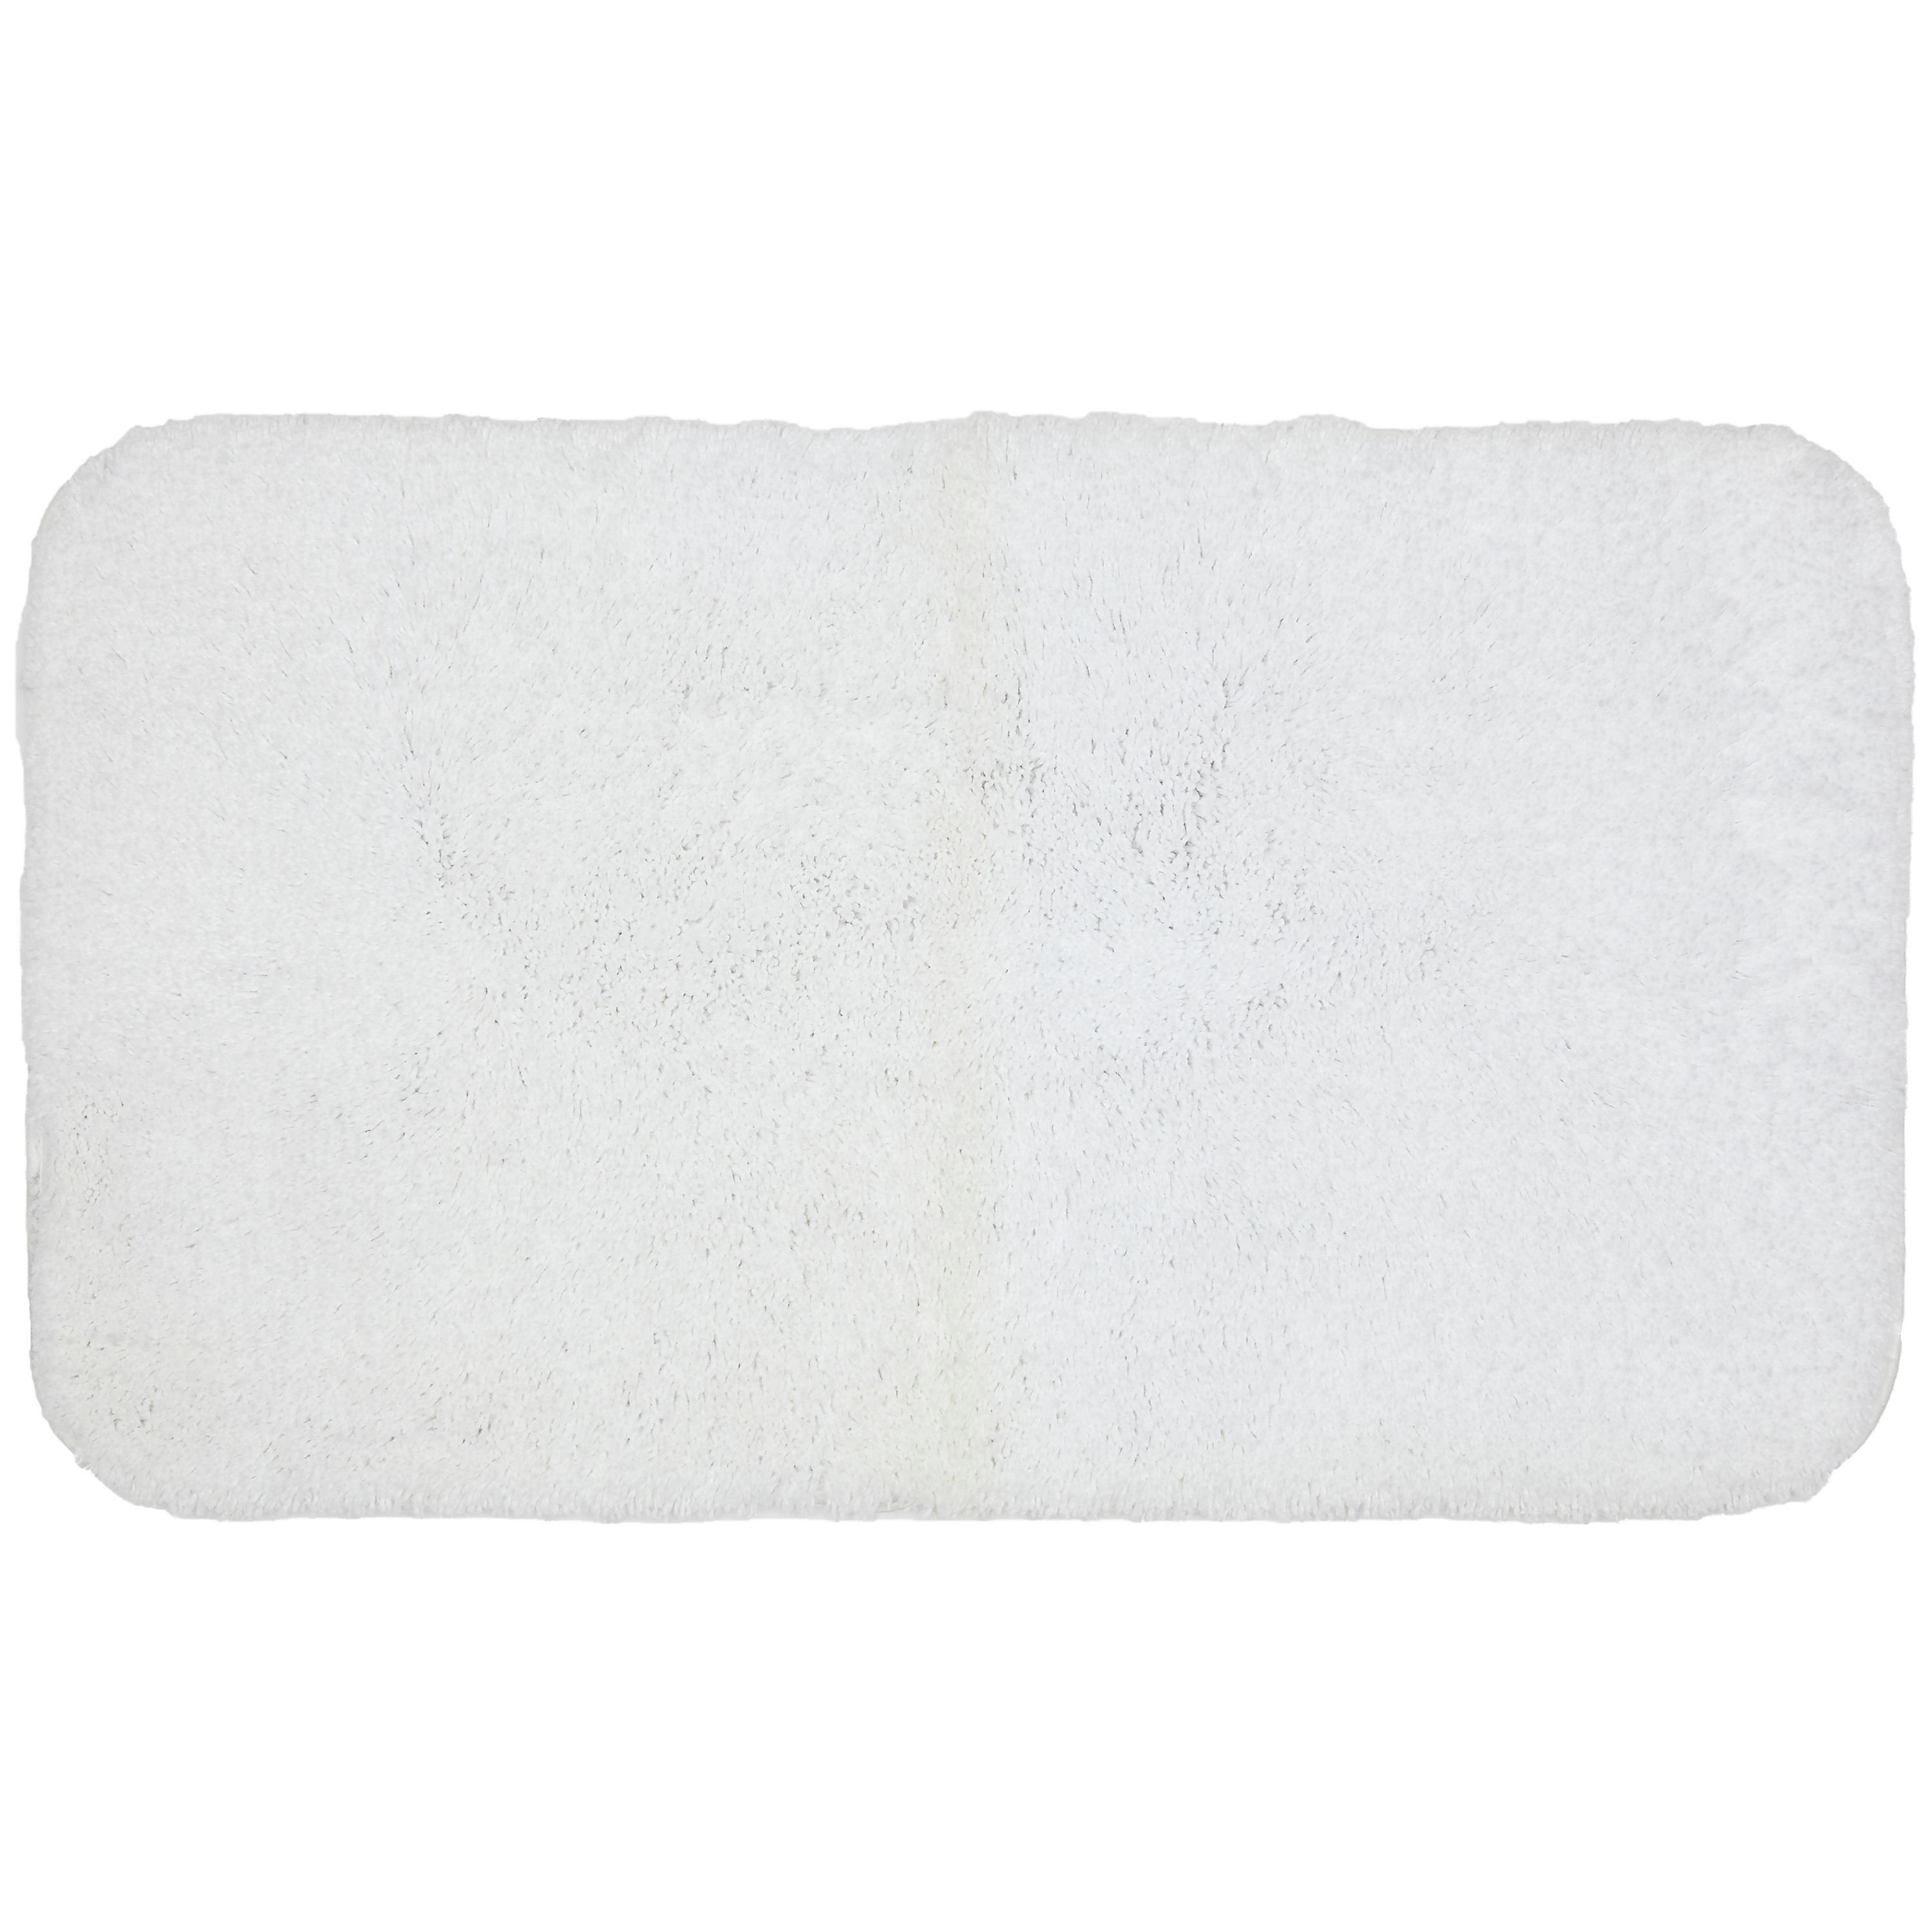 Mohawk Home Pure Perfection Nylon Bath Rug Scatter, White 1'8" x 5' - image 1 of 4